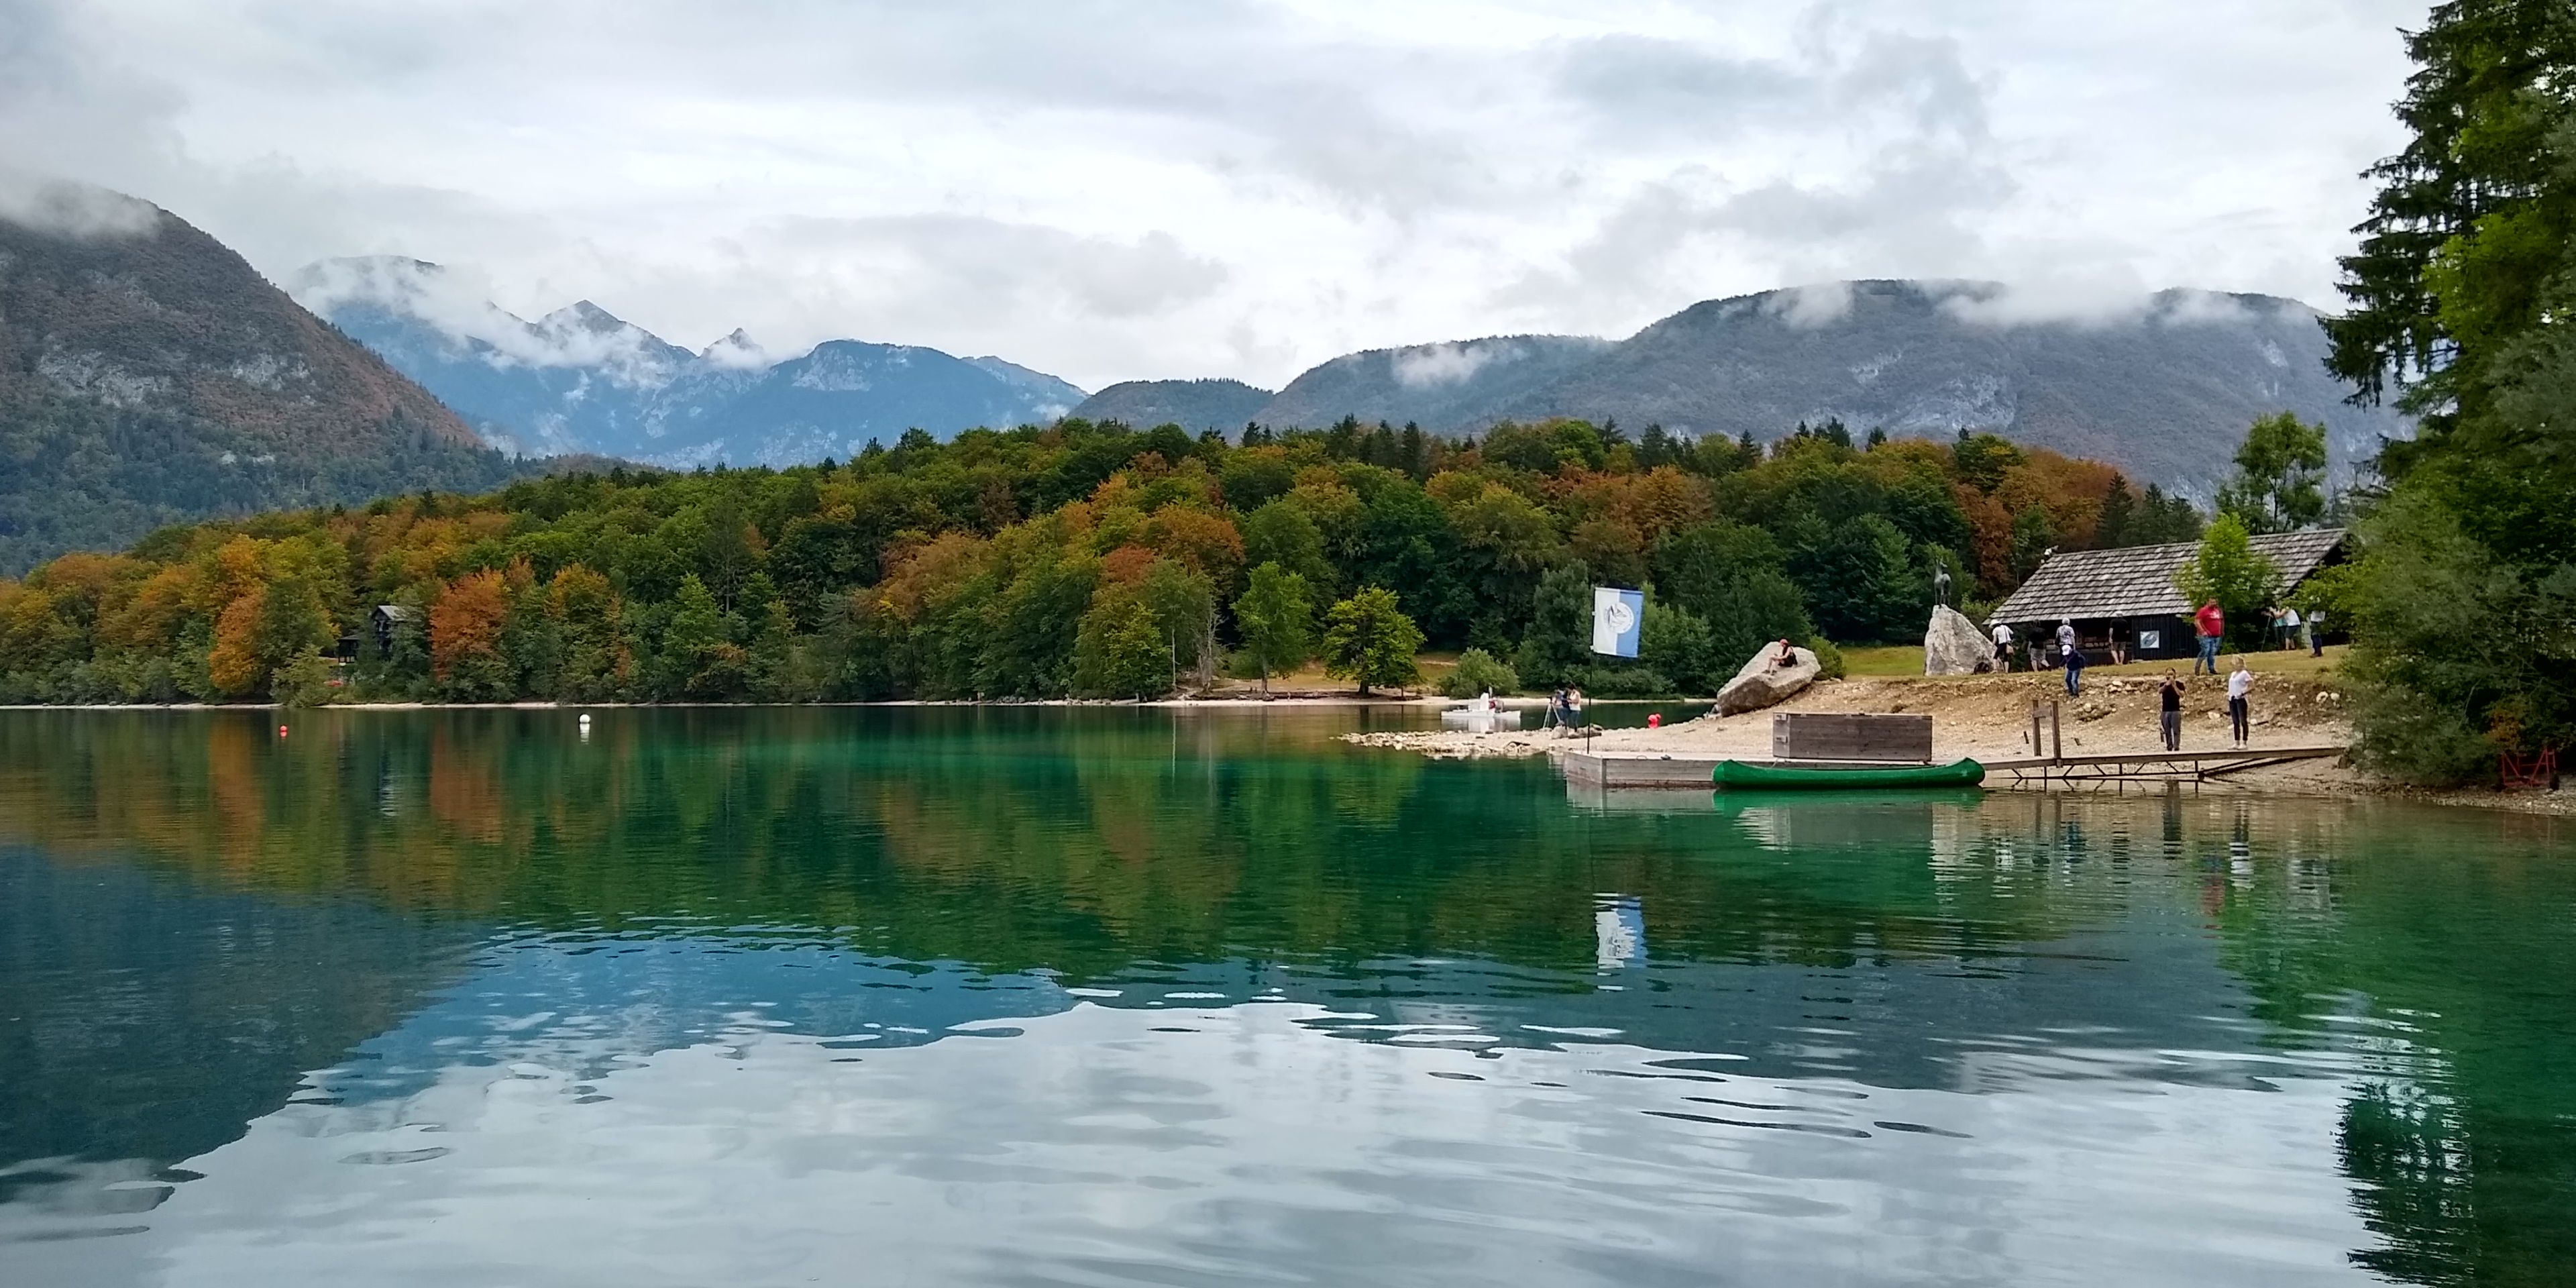 Caption: A photo of a landscape in Slovenia, taken on a cloudy day for across the water. (Local Guide @vvbellur)